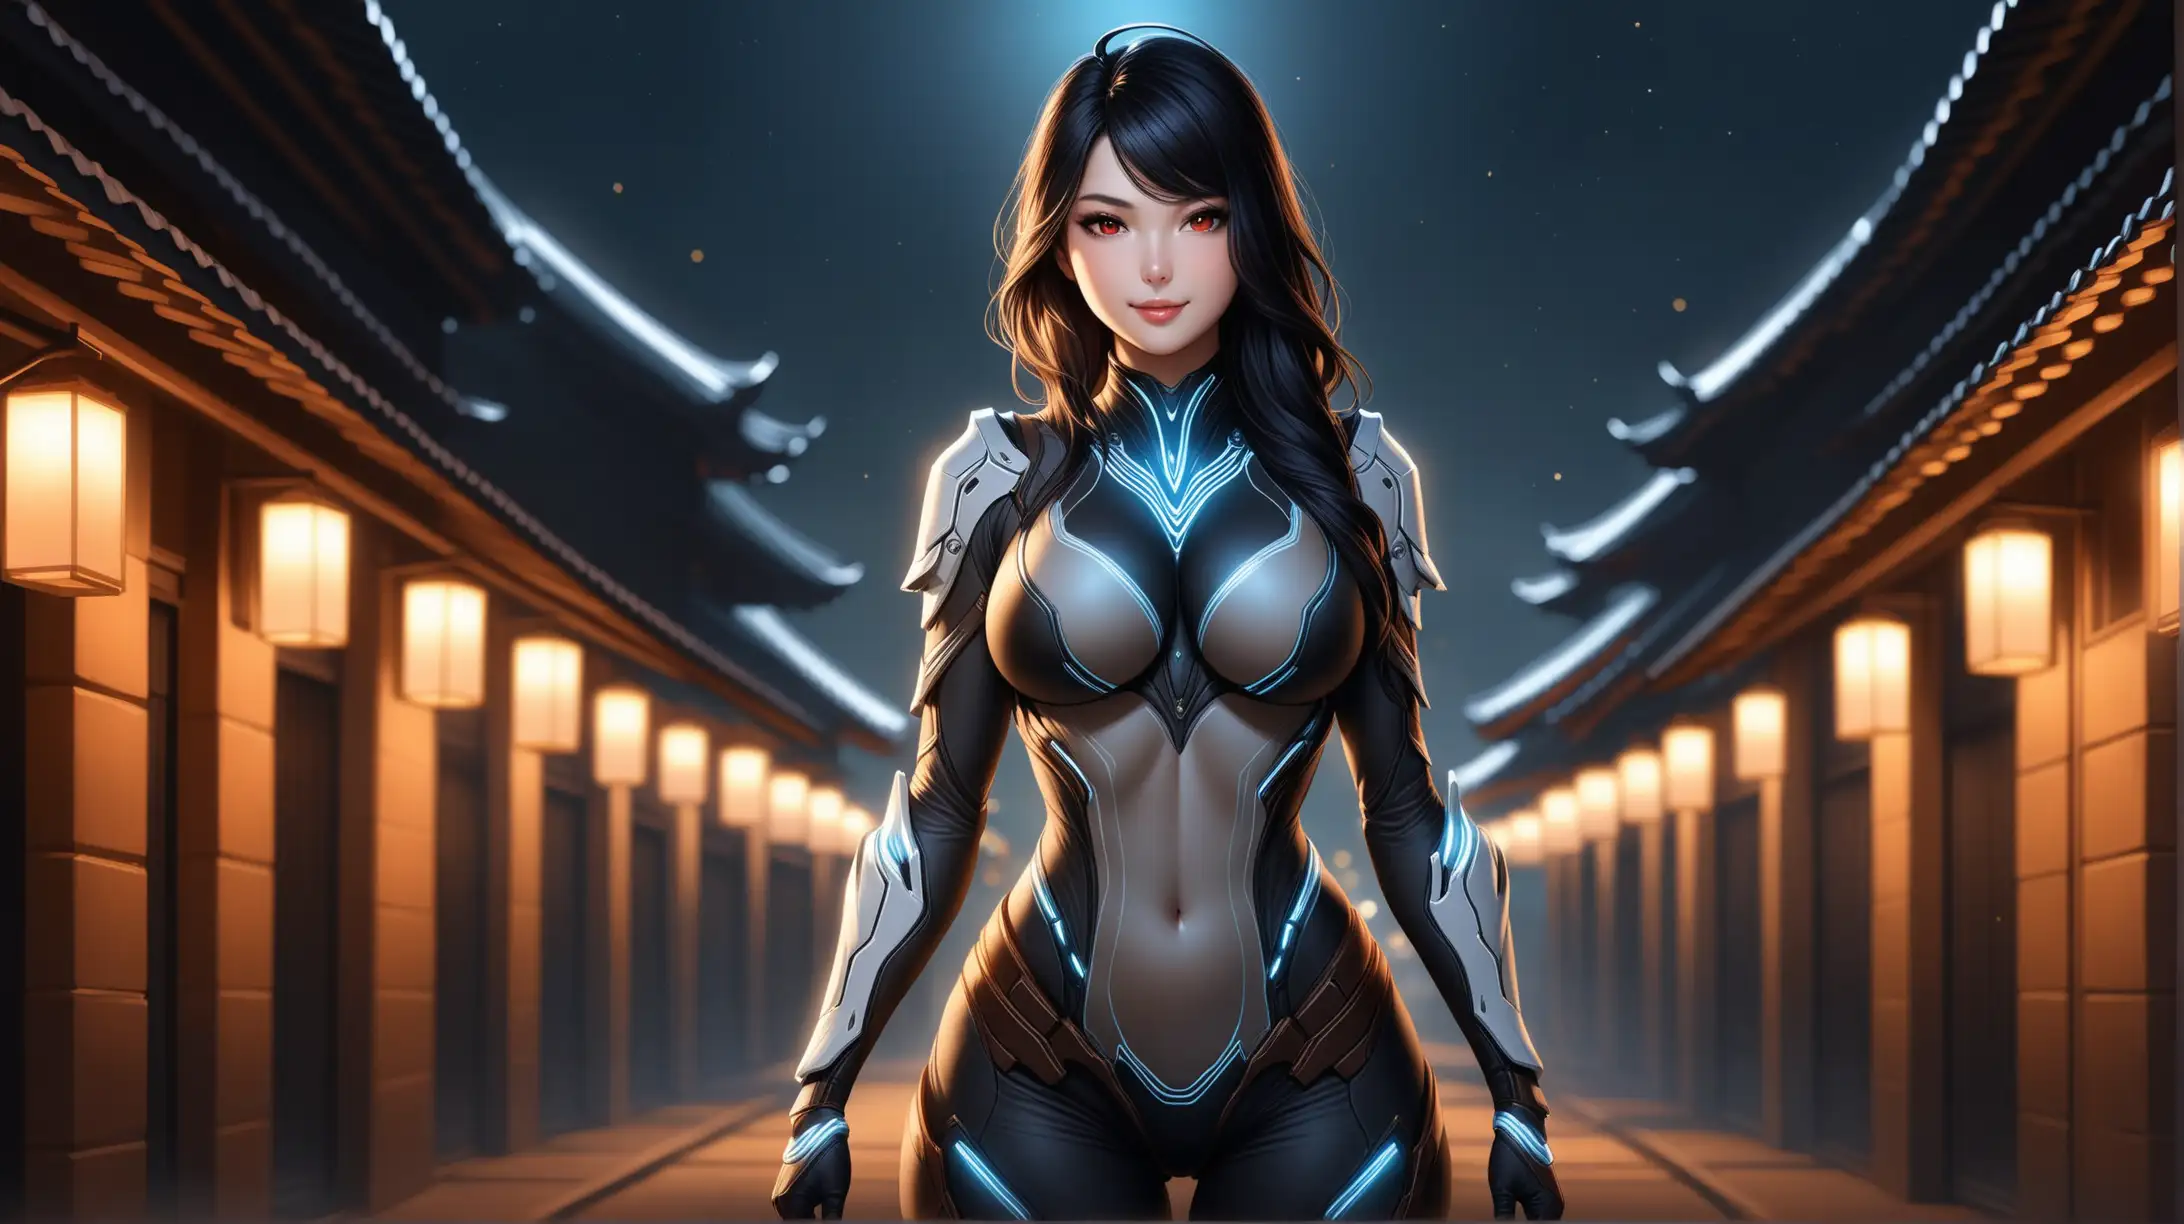 Draw a woman, long wavy black hair, ahoge, red eyes, shapely figure, high quality, realistic, accurate, detailed, cowboy shot, night lighting, outdoors, outfit inspired by Warframe, seductive pose, smiling toward the viewer